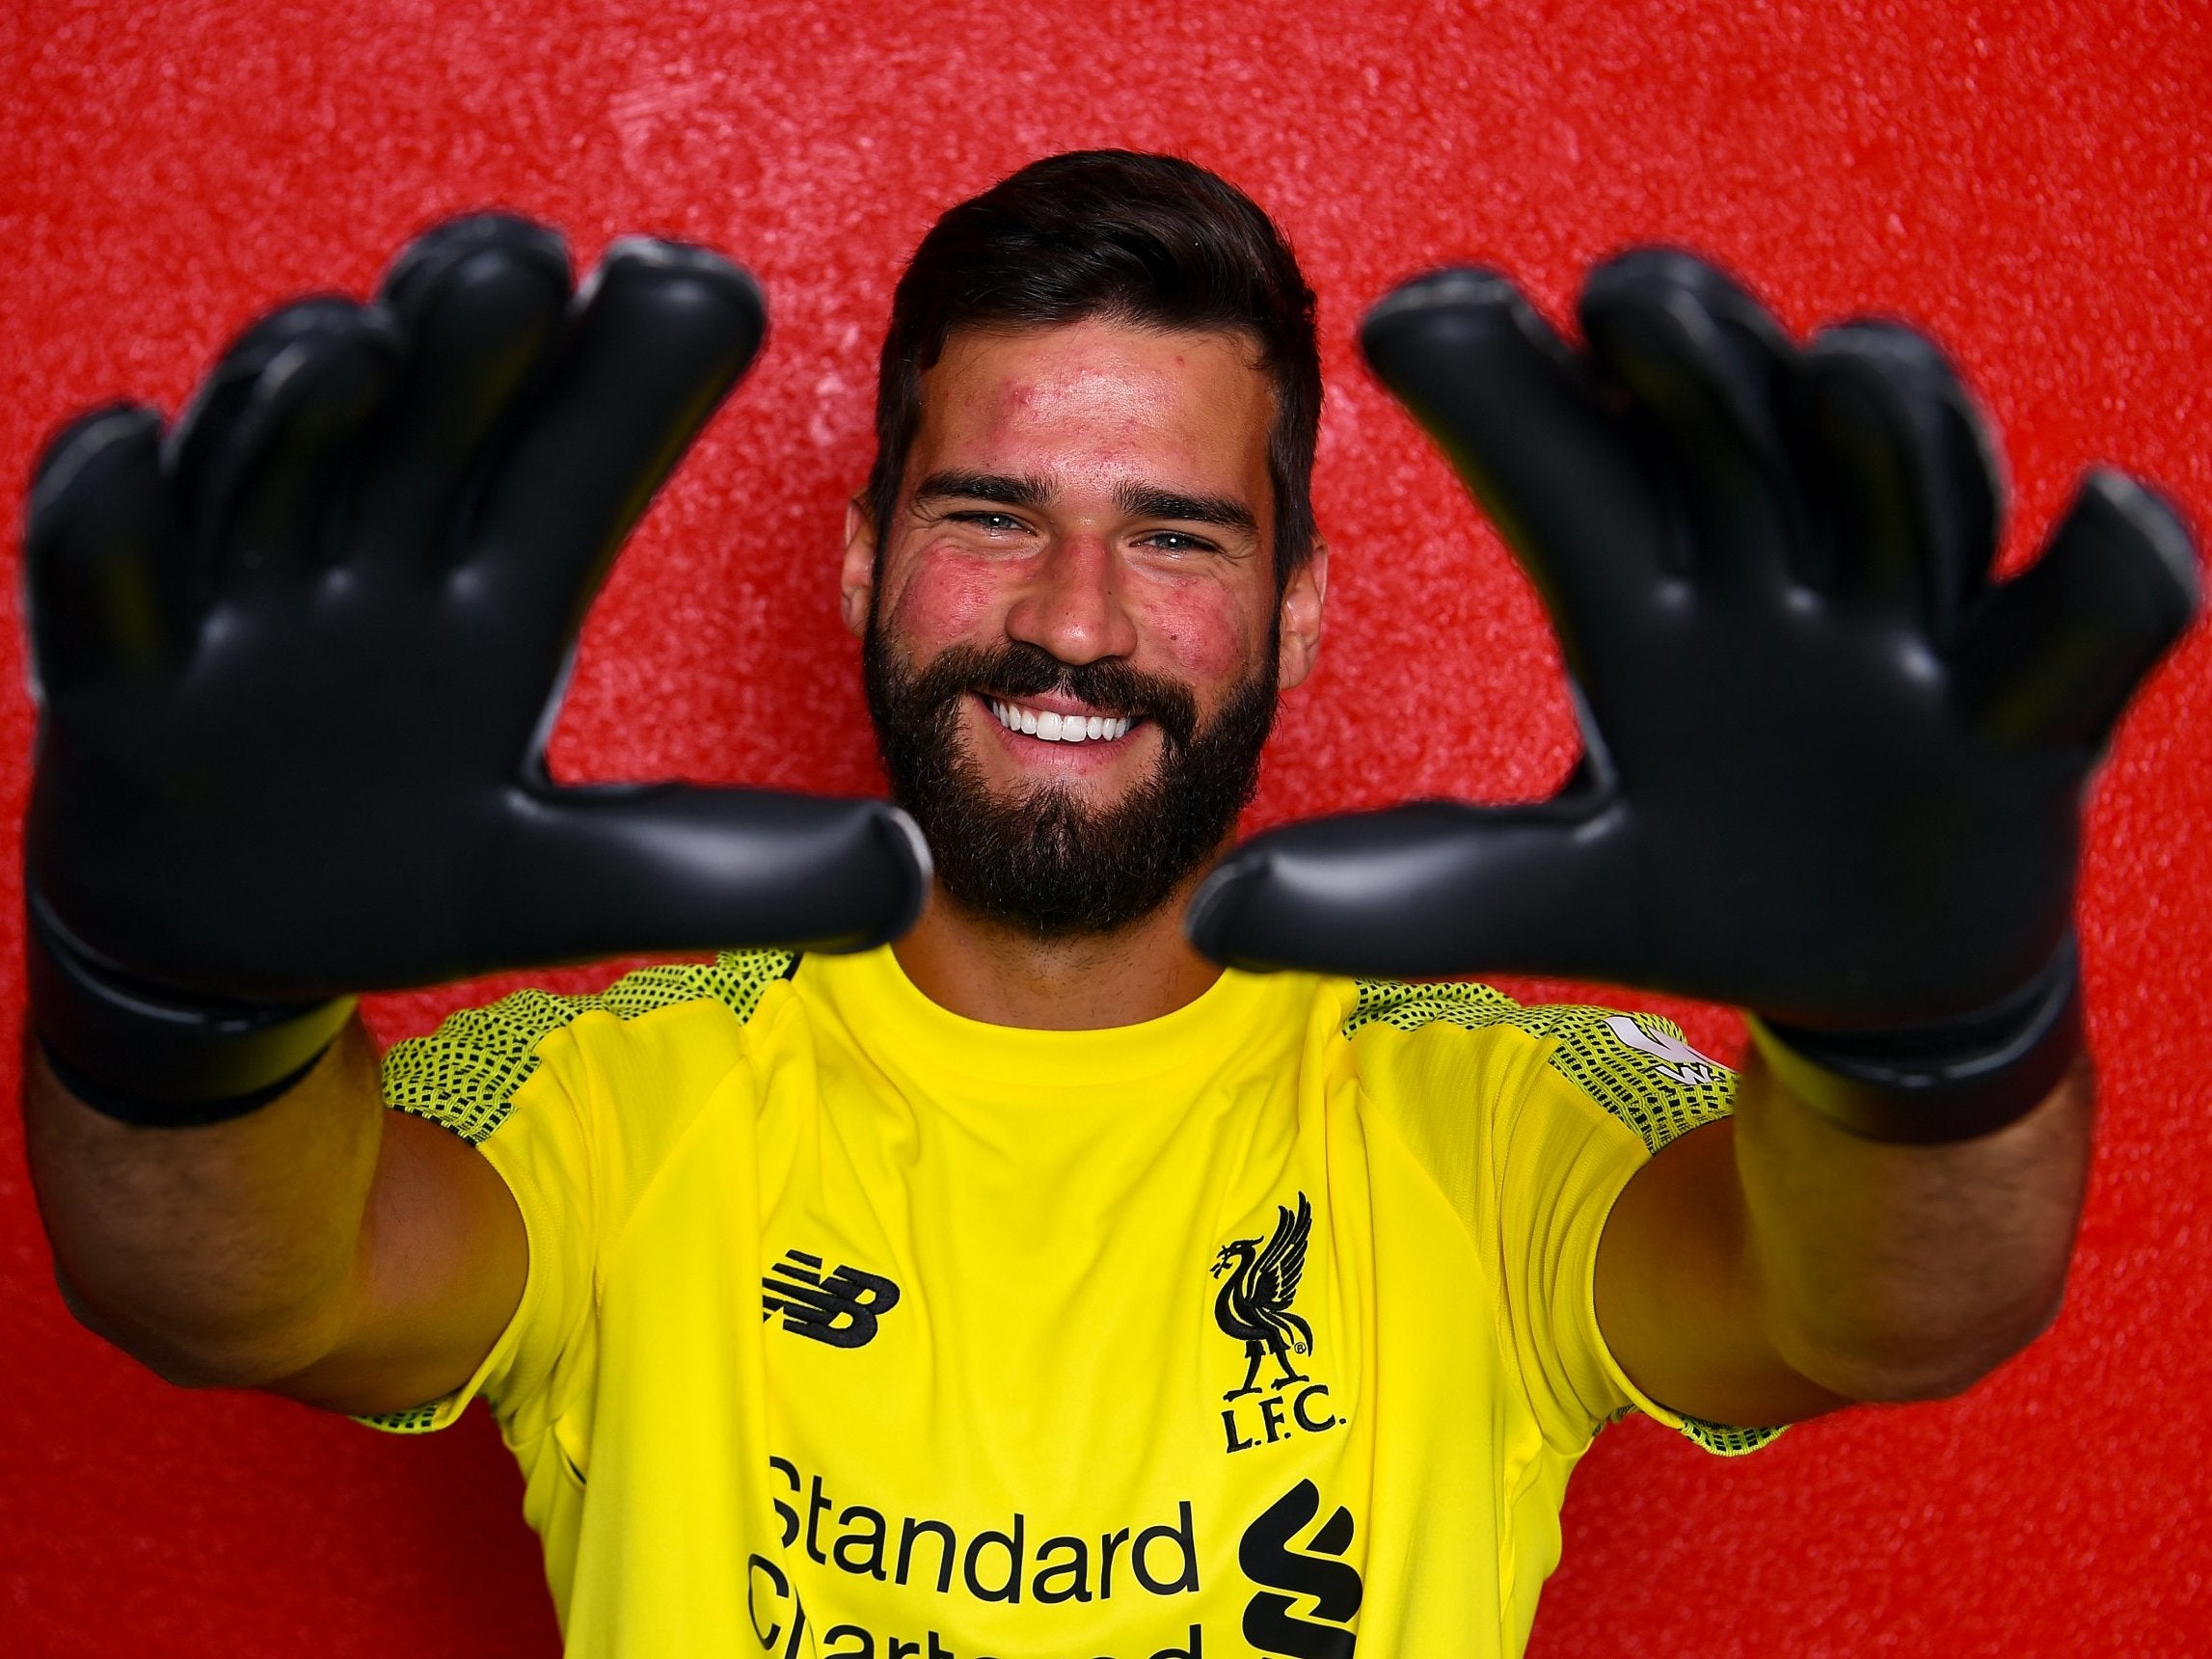 Transfer news, rumours - LIVE: Liverpool sign Alisson, Manchester United target Bayern Munich duo, Chelsea triple deal plus latest Arsenal, Spurs and more